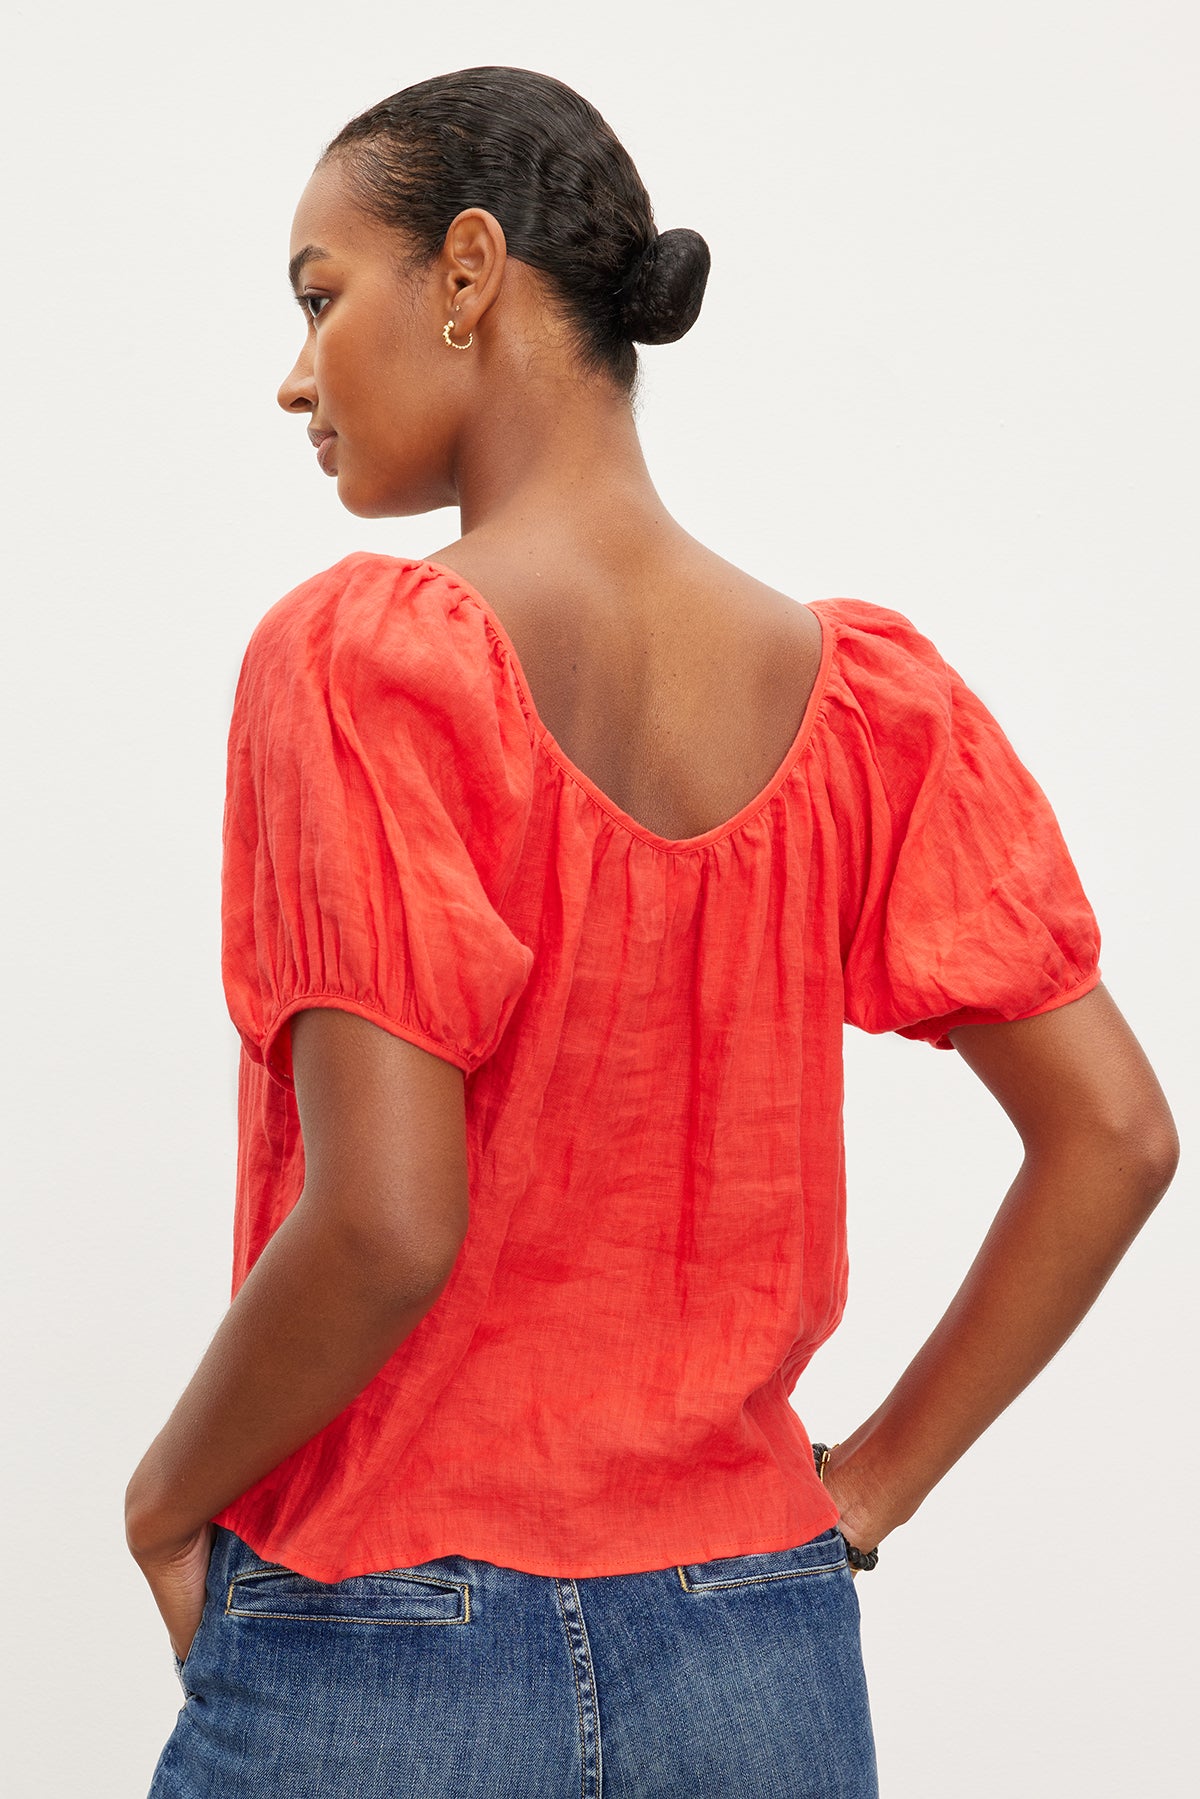 The back view of a woman wearing a Velvet by Graham & Spencer DANA LINEN SCOOP NECK TOP and jeans.-35955692339393